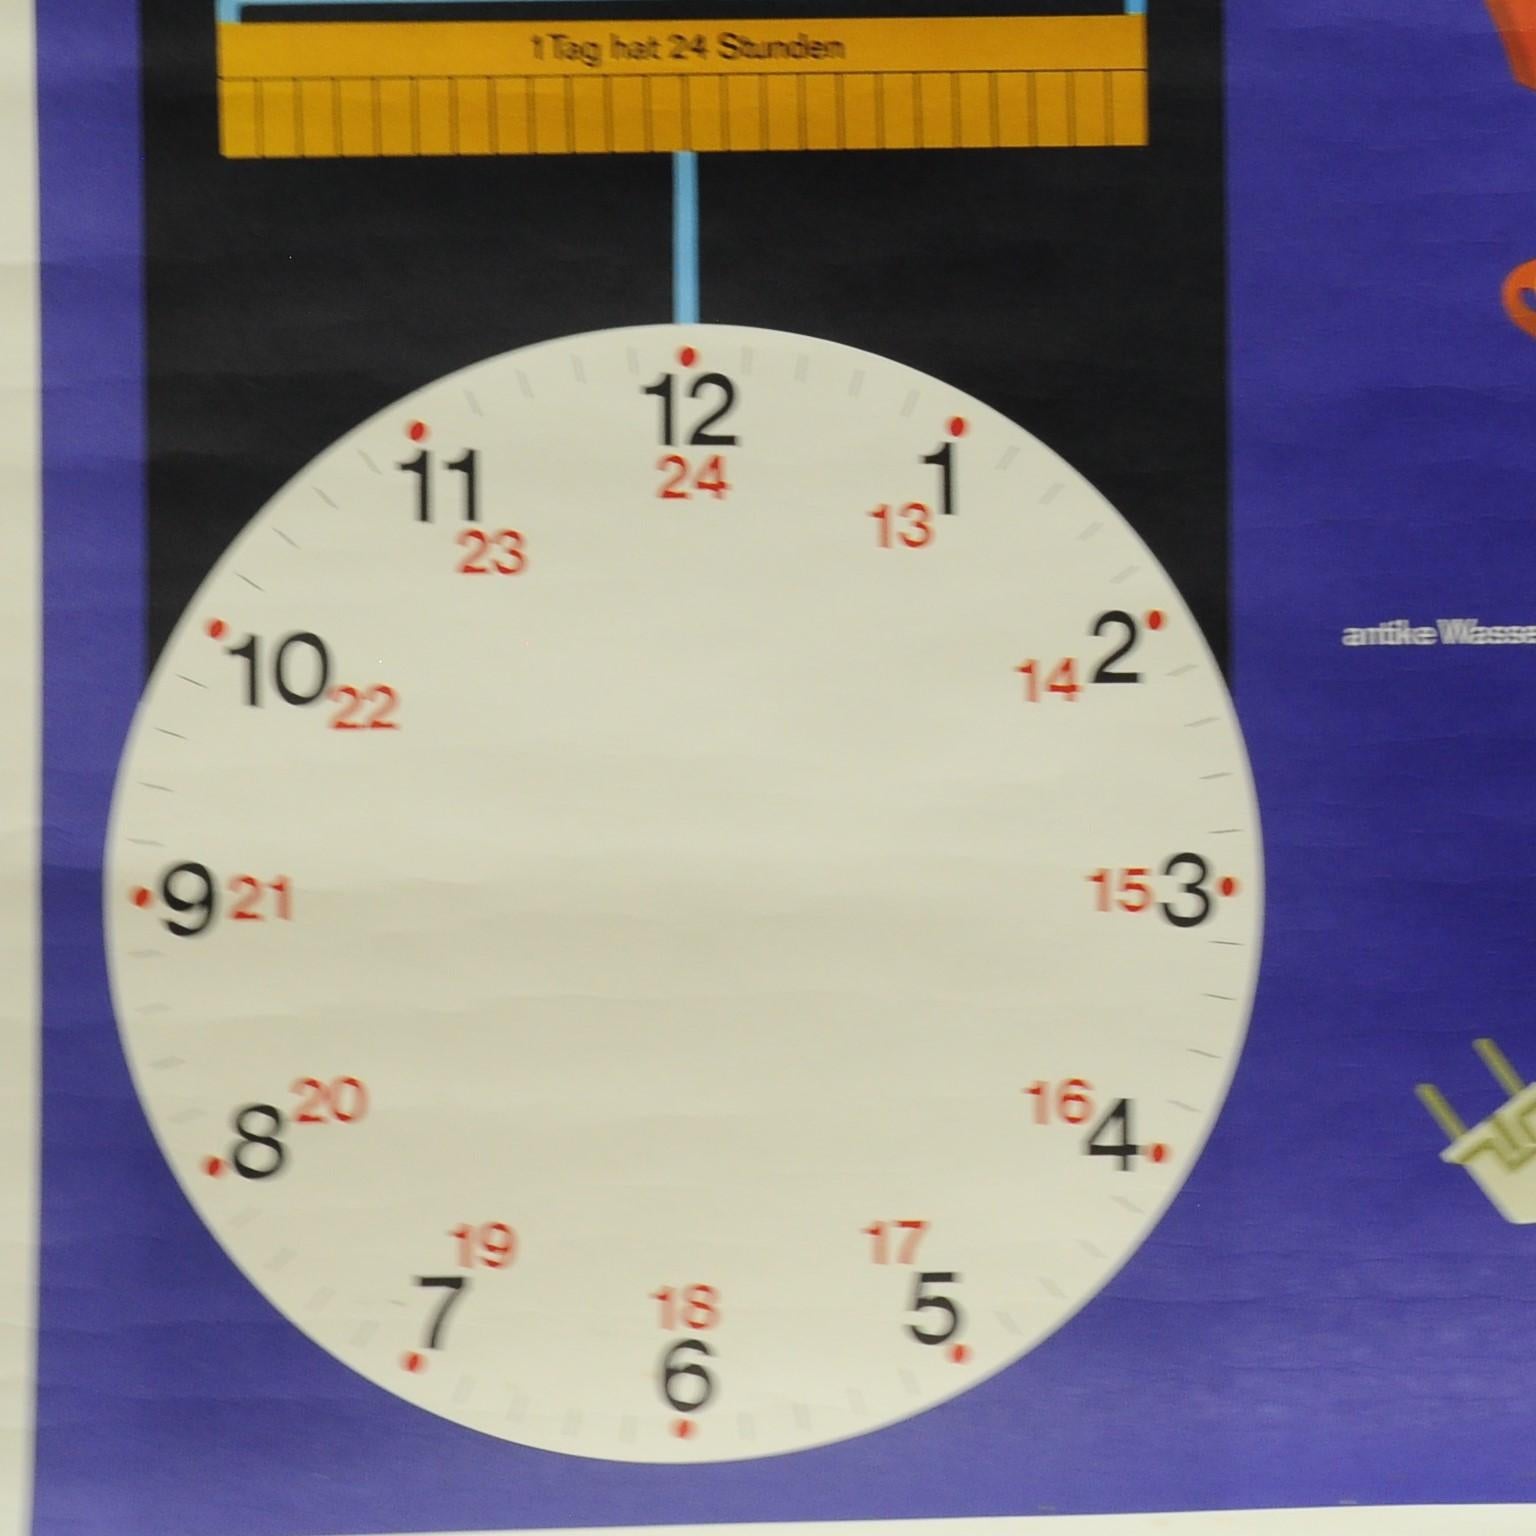 The wall chart shows how the time measurement works. The wall chart was published by Kosmos- Wandbild. Colorful print on paper reinforced with canvas.
Measurements:
Width 92cm (36.22 inch)
Height 59.50 cm (23.43 inch)

The measurements shown